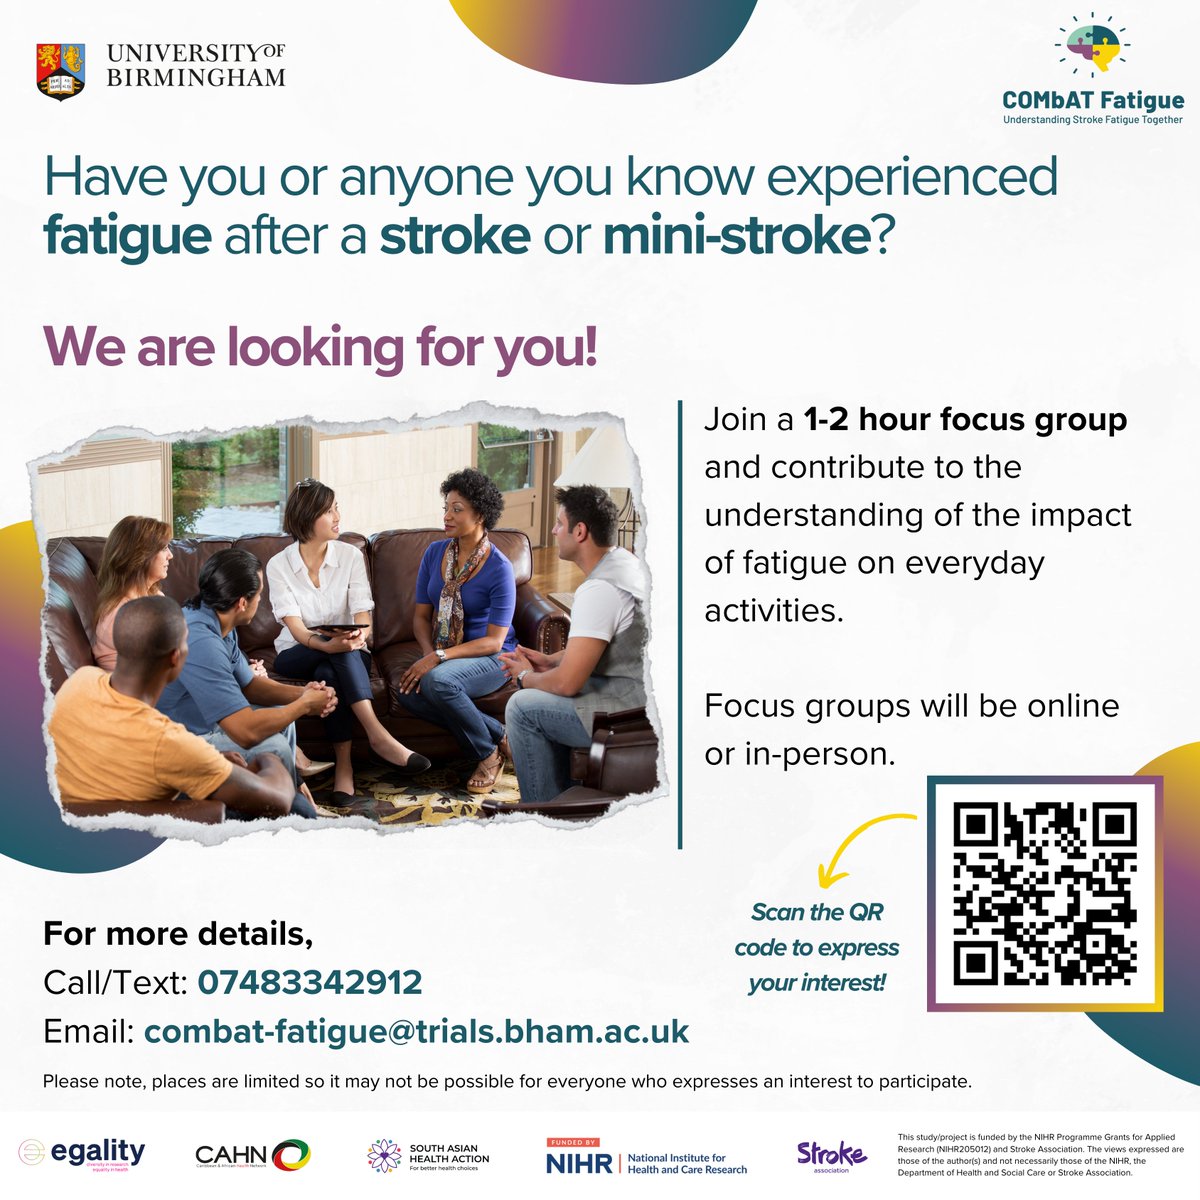 The COMbAT Fatigue study will bridge the gap in post-stroke care & symptom management, developing a programme to help people cope better with fatigue after stroke & mini stroke. 🔗bit.ly/3Uy0Yoo